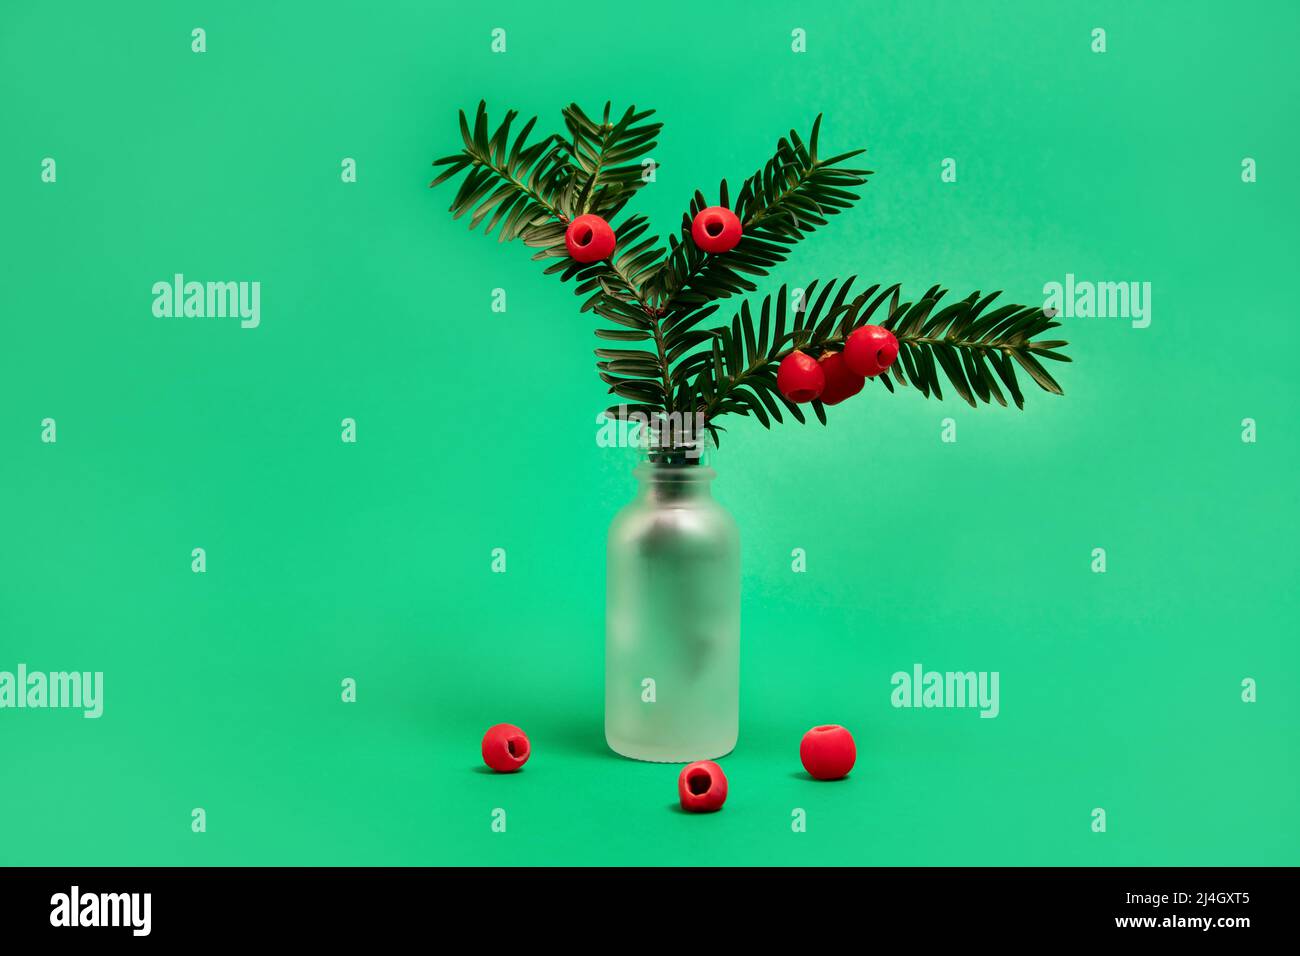 Common yew in a bottle on green background Stock Photo